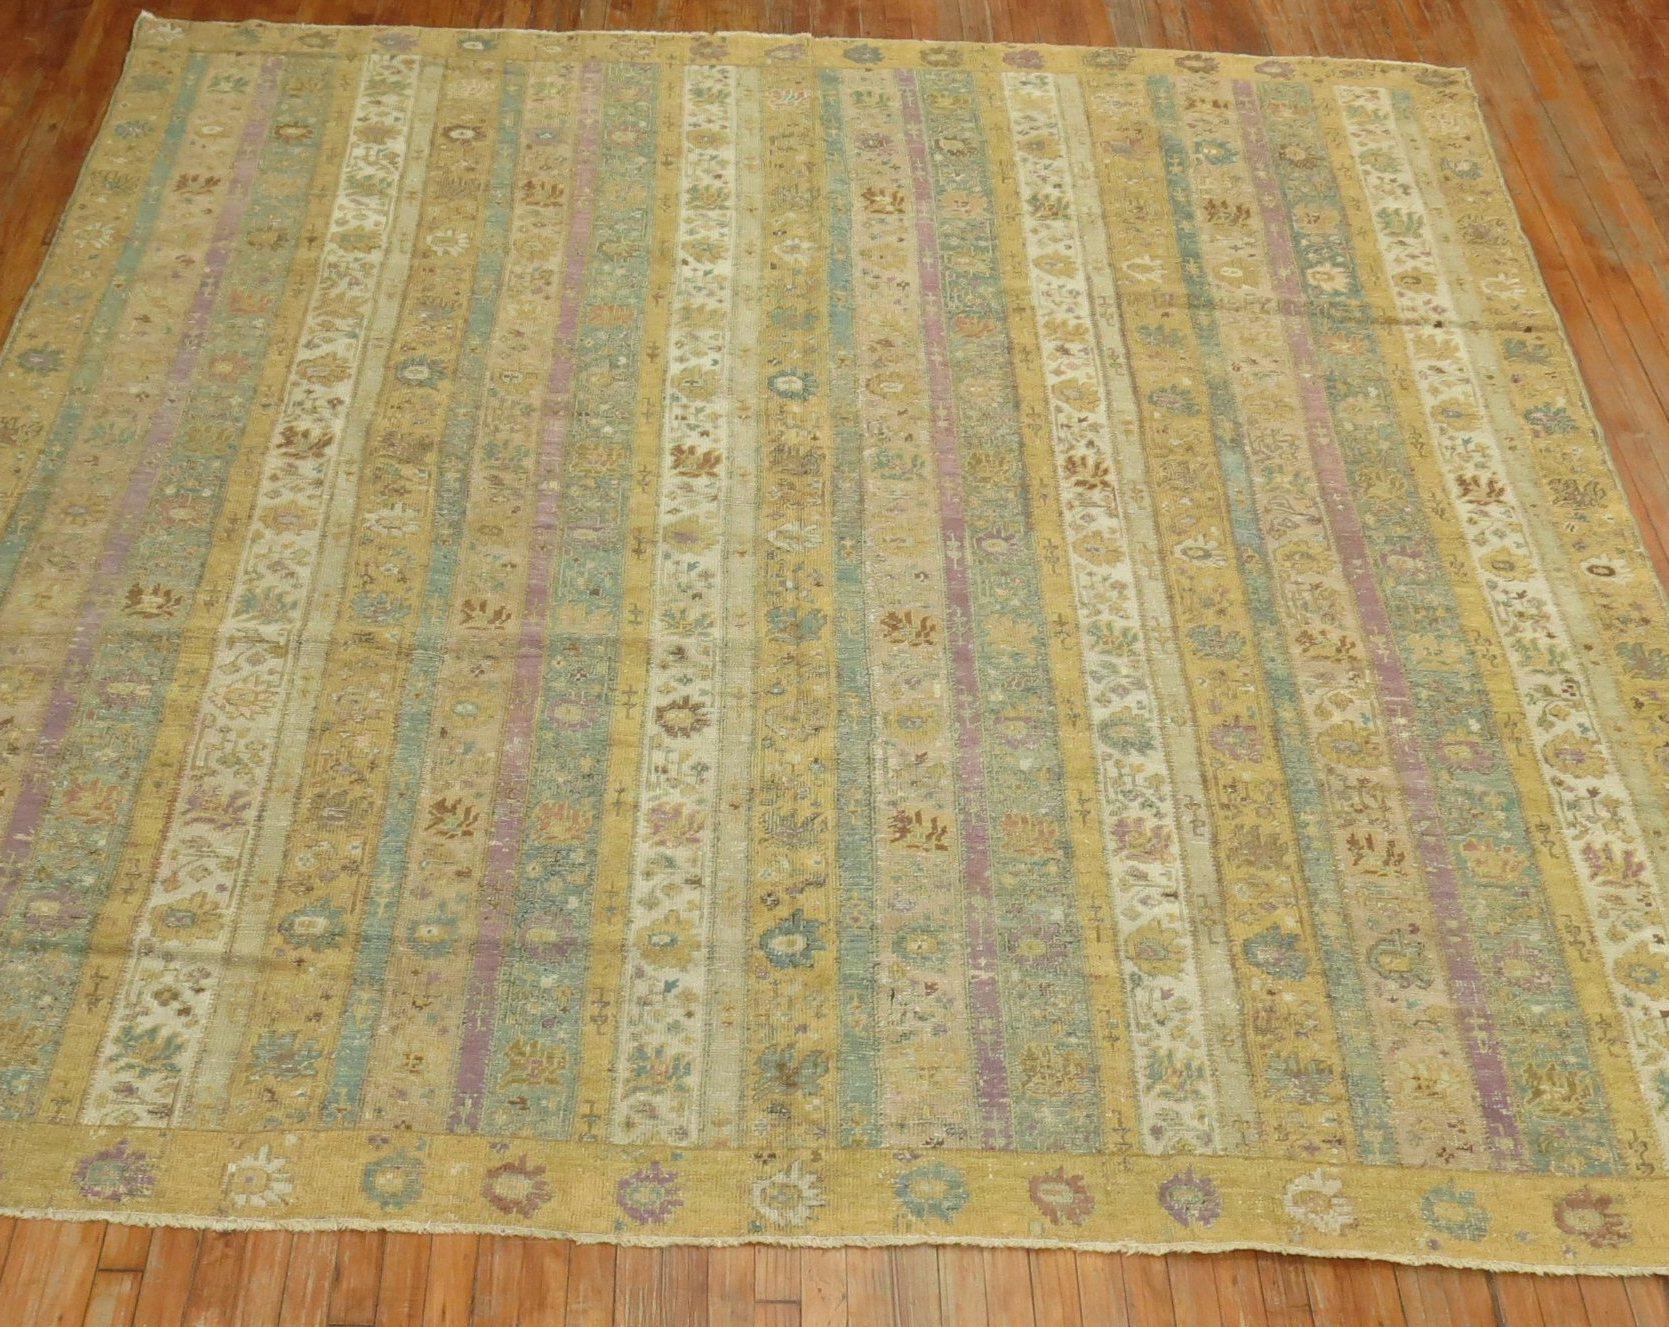 A square size early 20th century Turkish Ghiordes rug having an all-over pattern of narrow vertical floral meander stripes in khaki, lavender, sand, mint, and brown accents within a narrow sandy motif border. Size is original. The ghiordes village